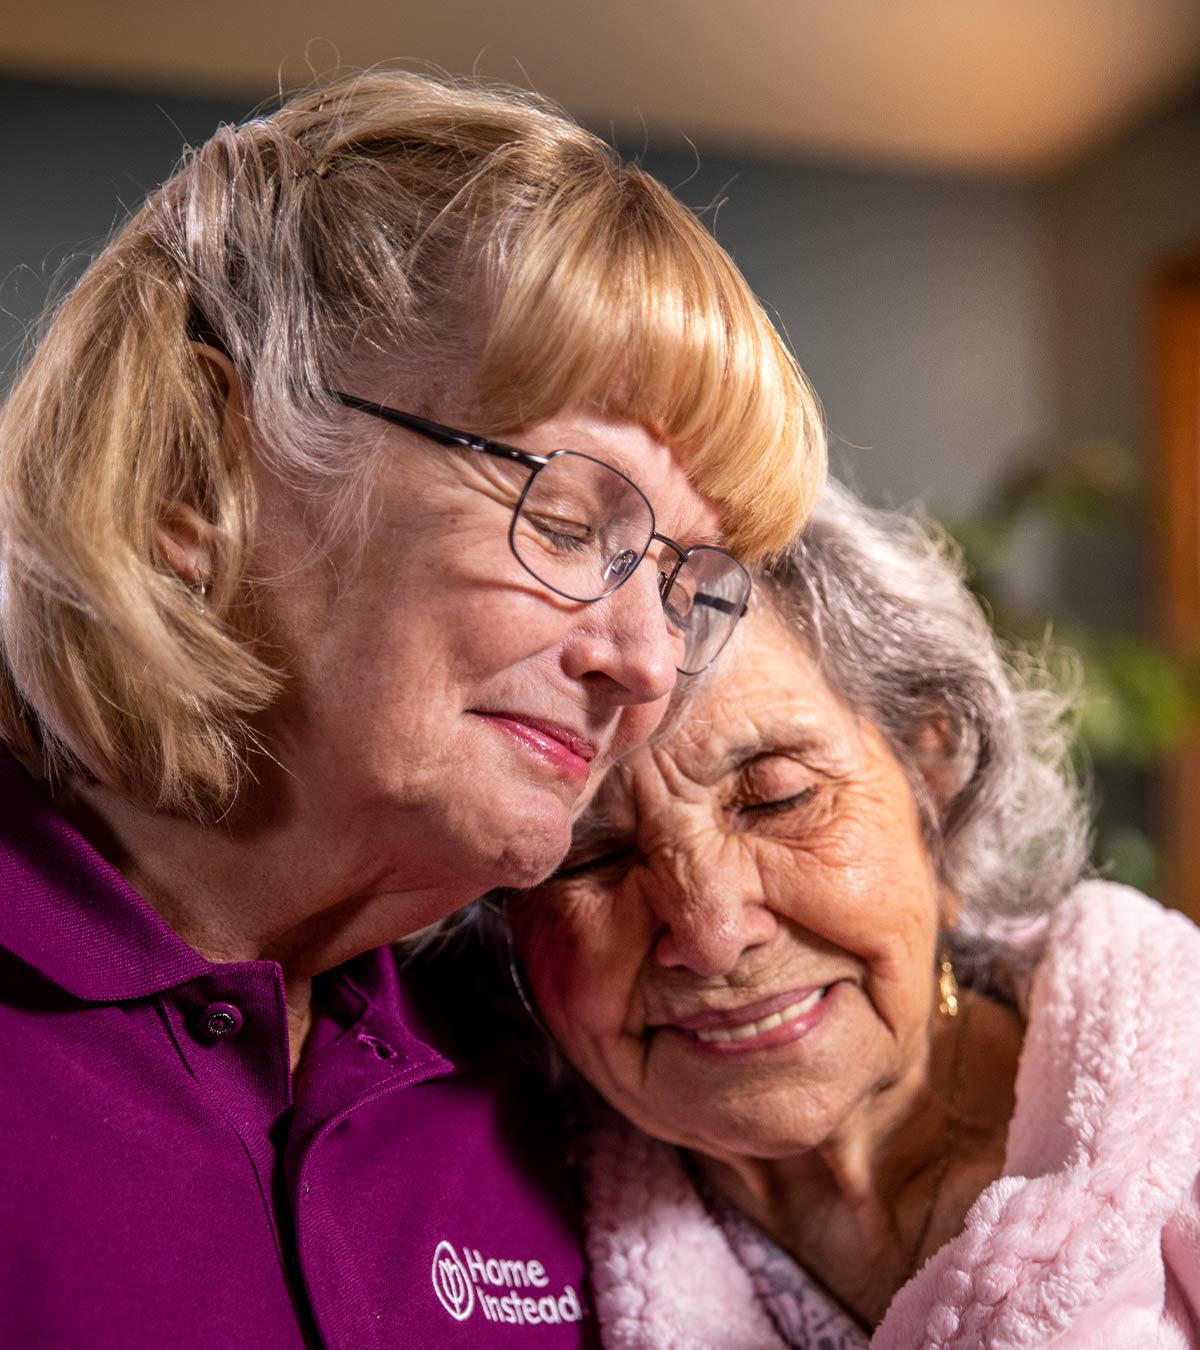 CAREGiver providing in-home senior care services. Home Instead of Conway, AR provides Elder Care to aging adults. 